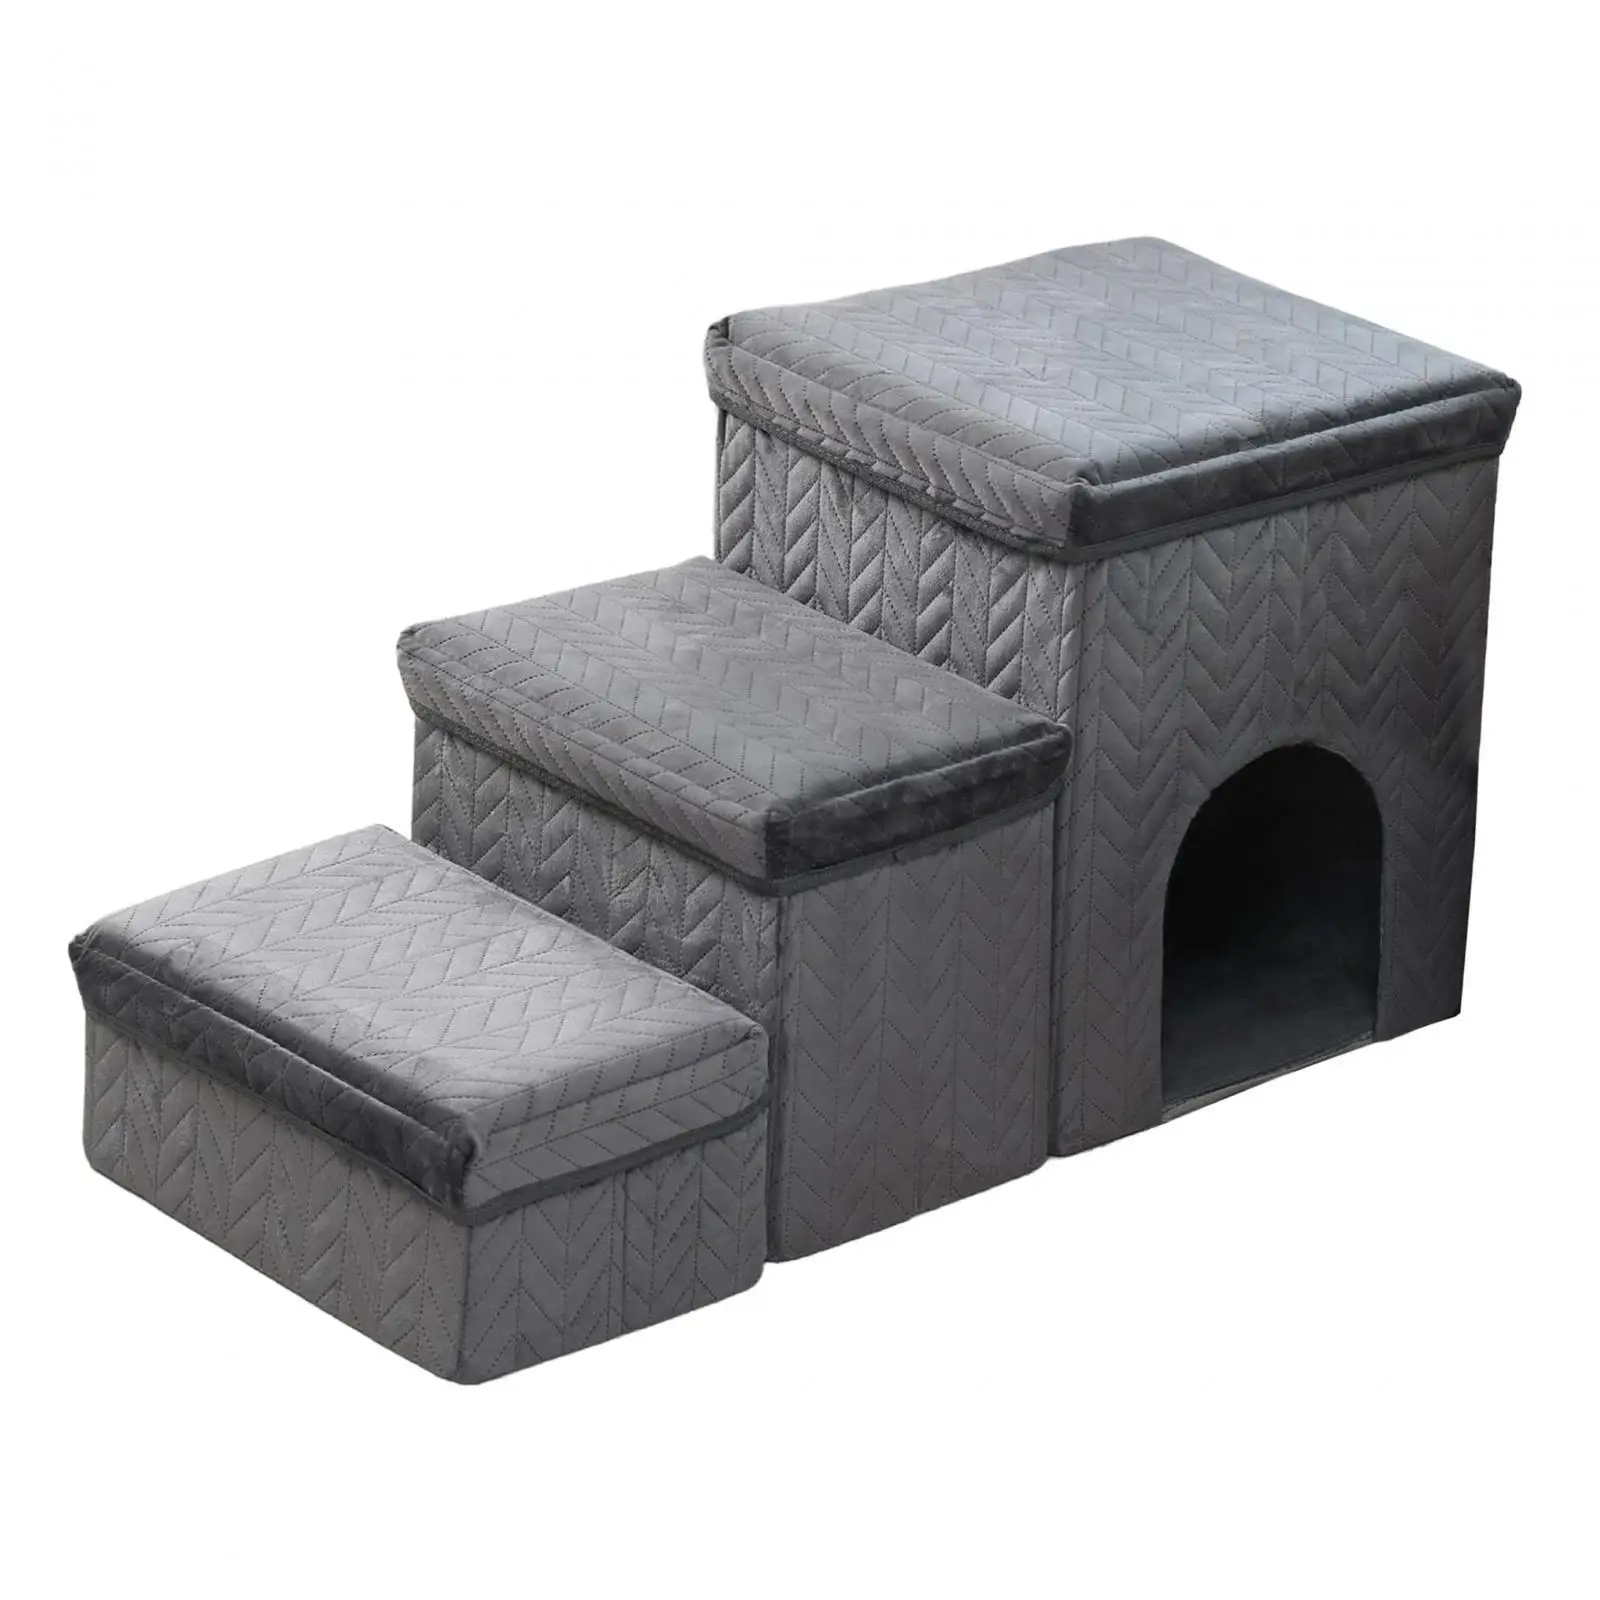 Foldable Pet Stairs Couch Anti Slip Pet Supplies Portable Durable Wear Resistant